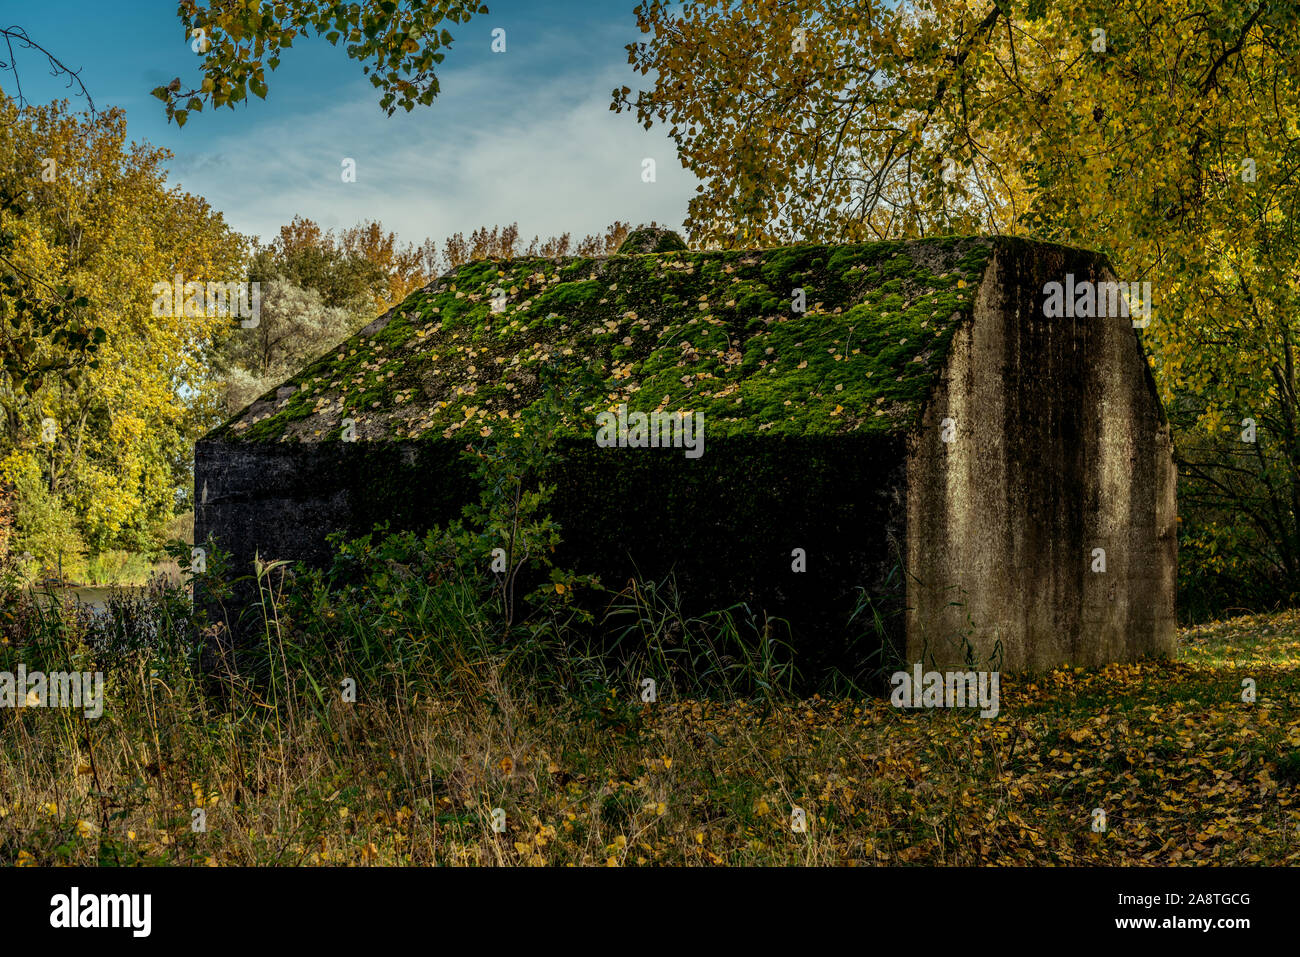 Overgrown Dutch bomb shelter in an autumn scene. This concrete bunker is situated near the village of Dordrecht in the national park the Biesbosch. Stock Photo